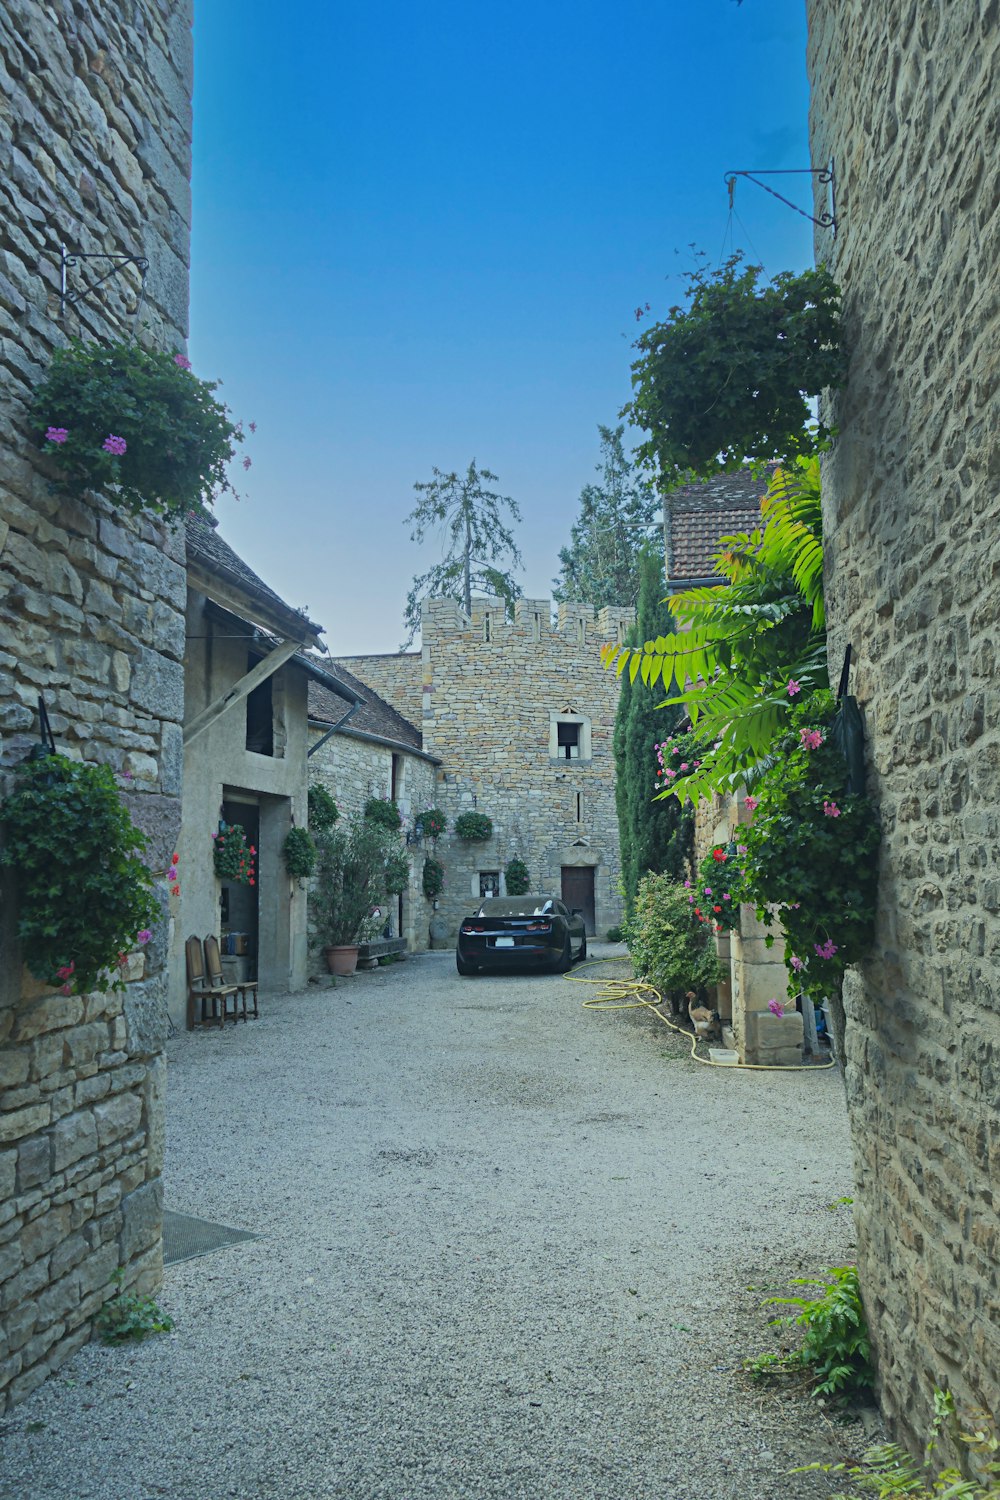 a car is parked on a cobblestone street